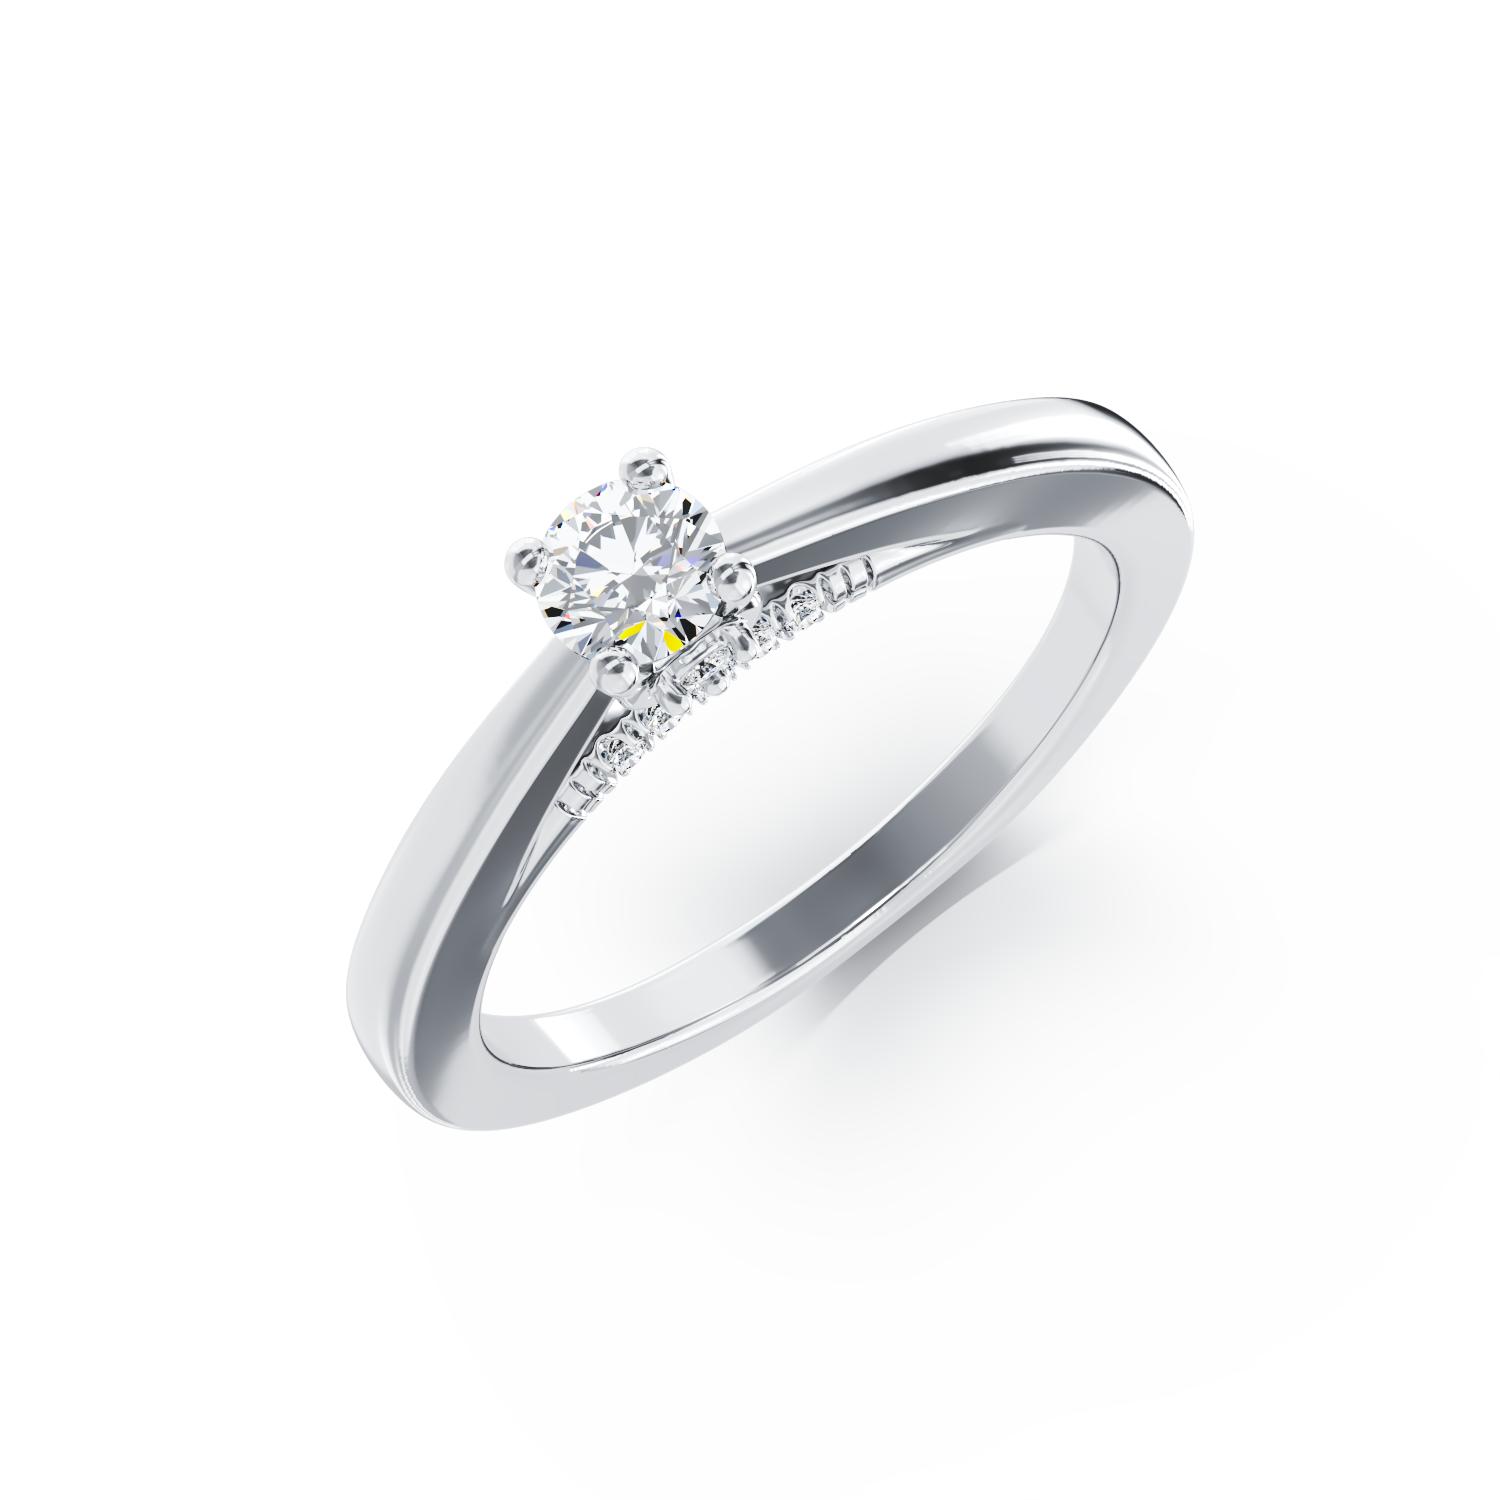 18K white gold engagement ring with 0.31ct diamond and 0.04ct diamonds